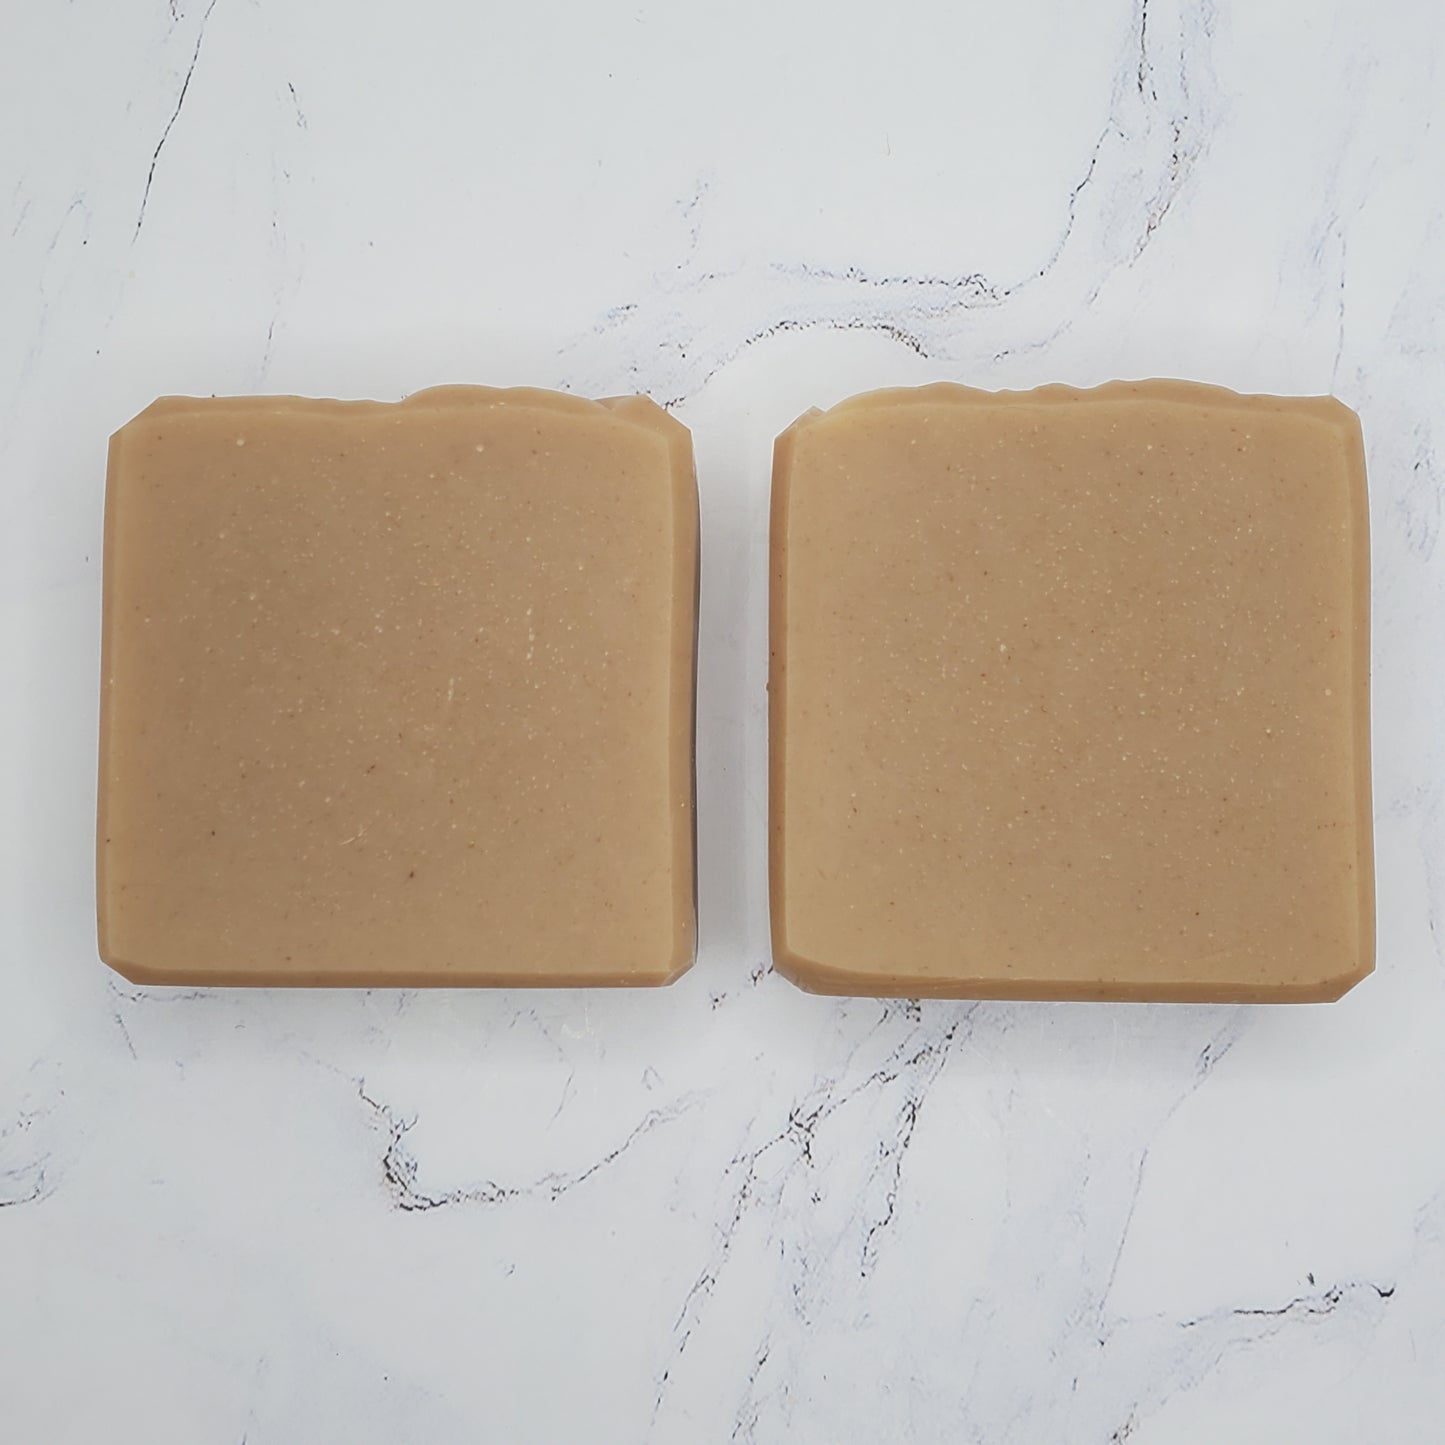 Oat, Milk, & Honey Bar Soap with Lavender and Clove Essential Oils